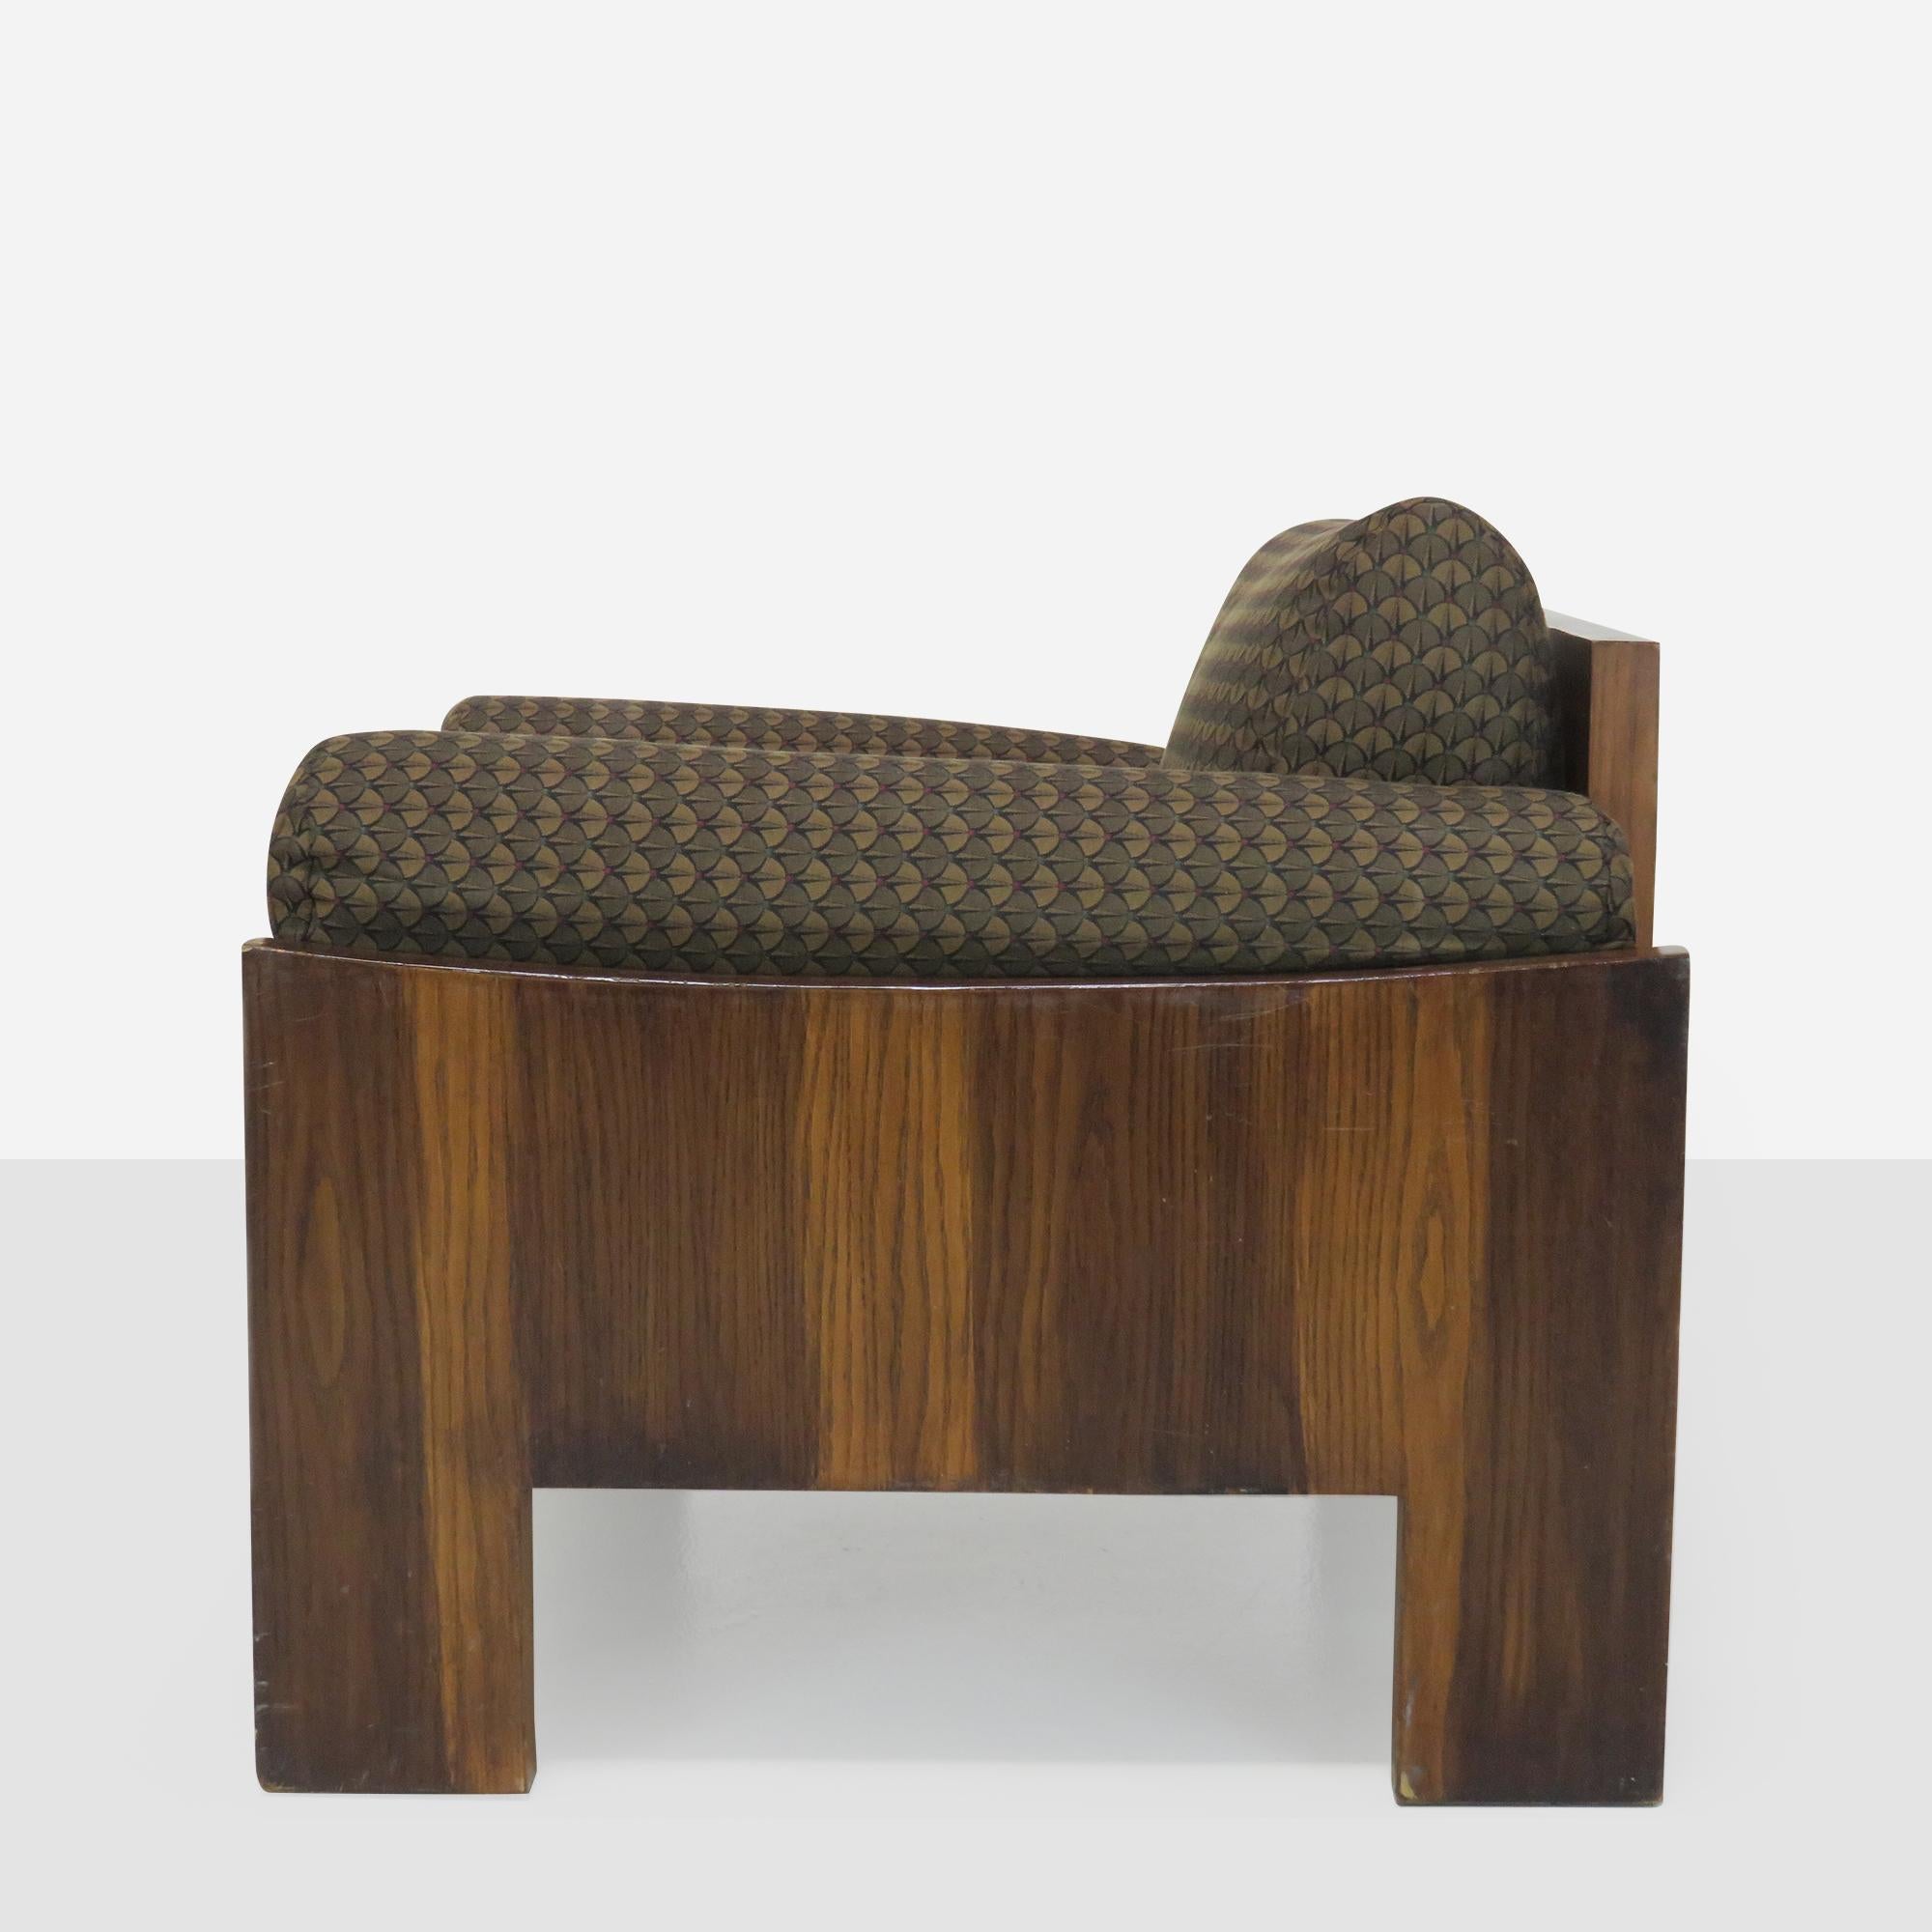 Solid Palisander wood Lounge chair by Milo Baughman In Good Condition For Sale In San Francisco, CA